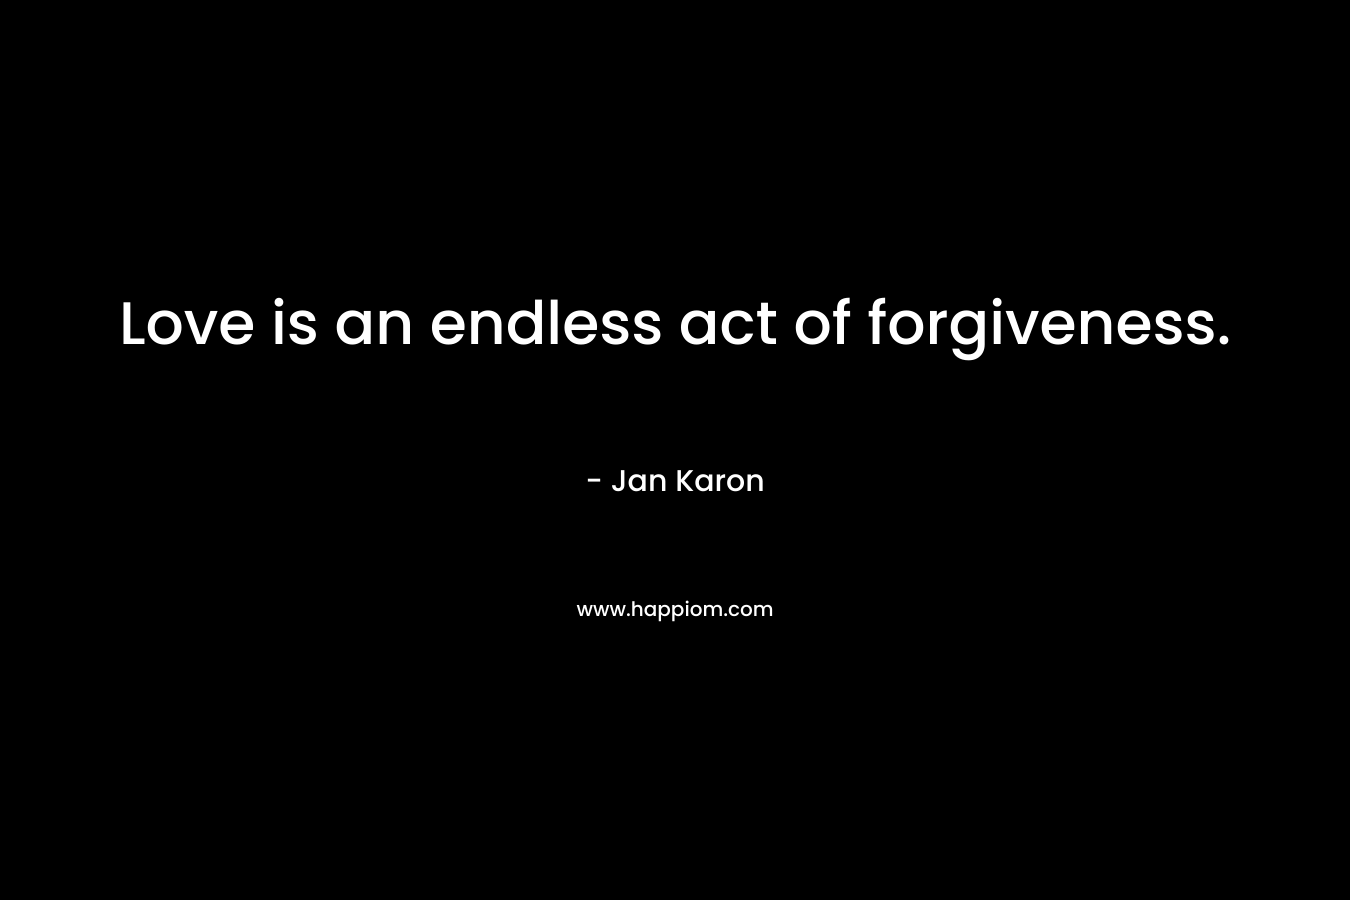 Love is an endless act of forgiveness.